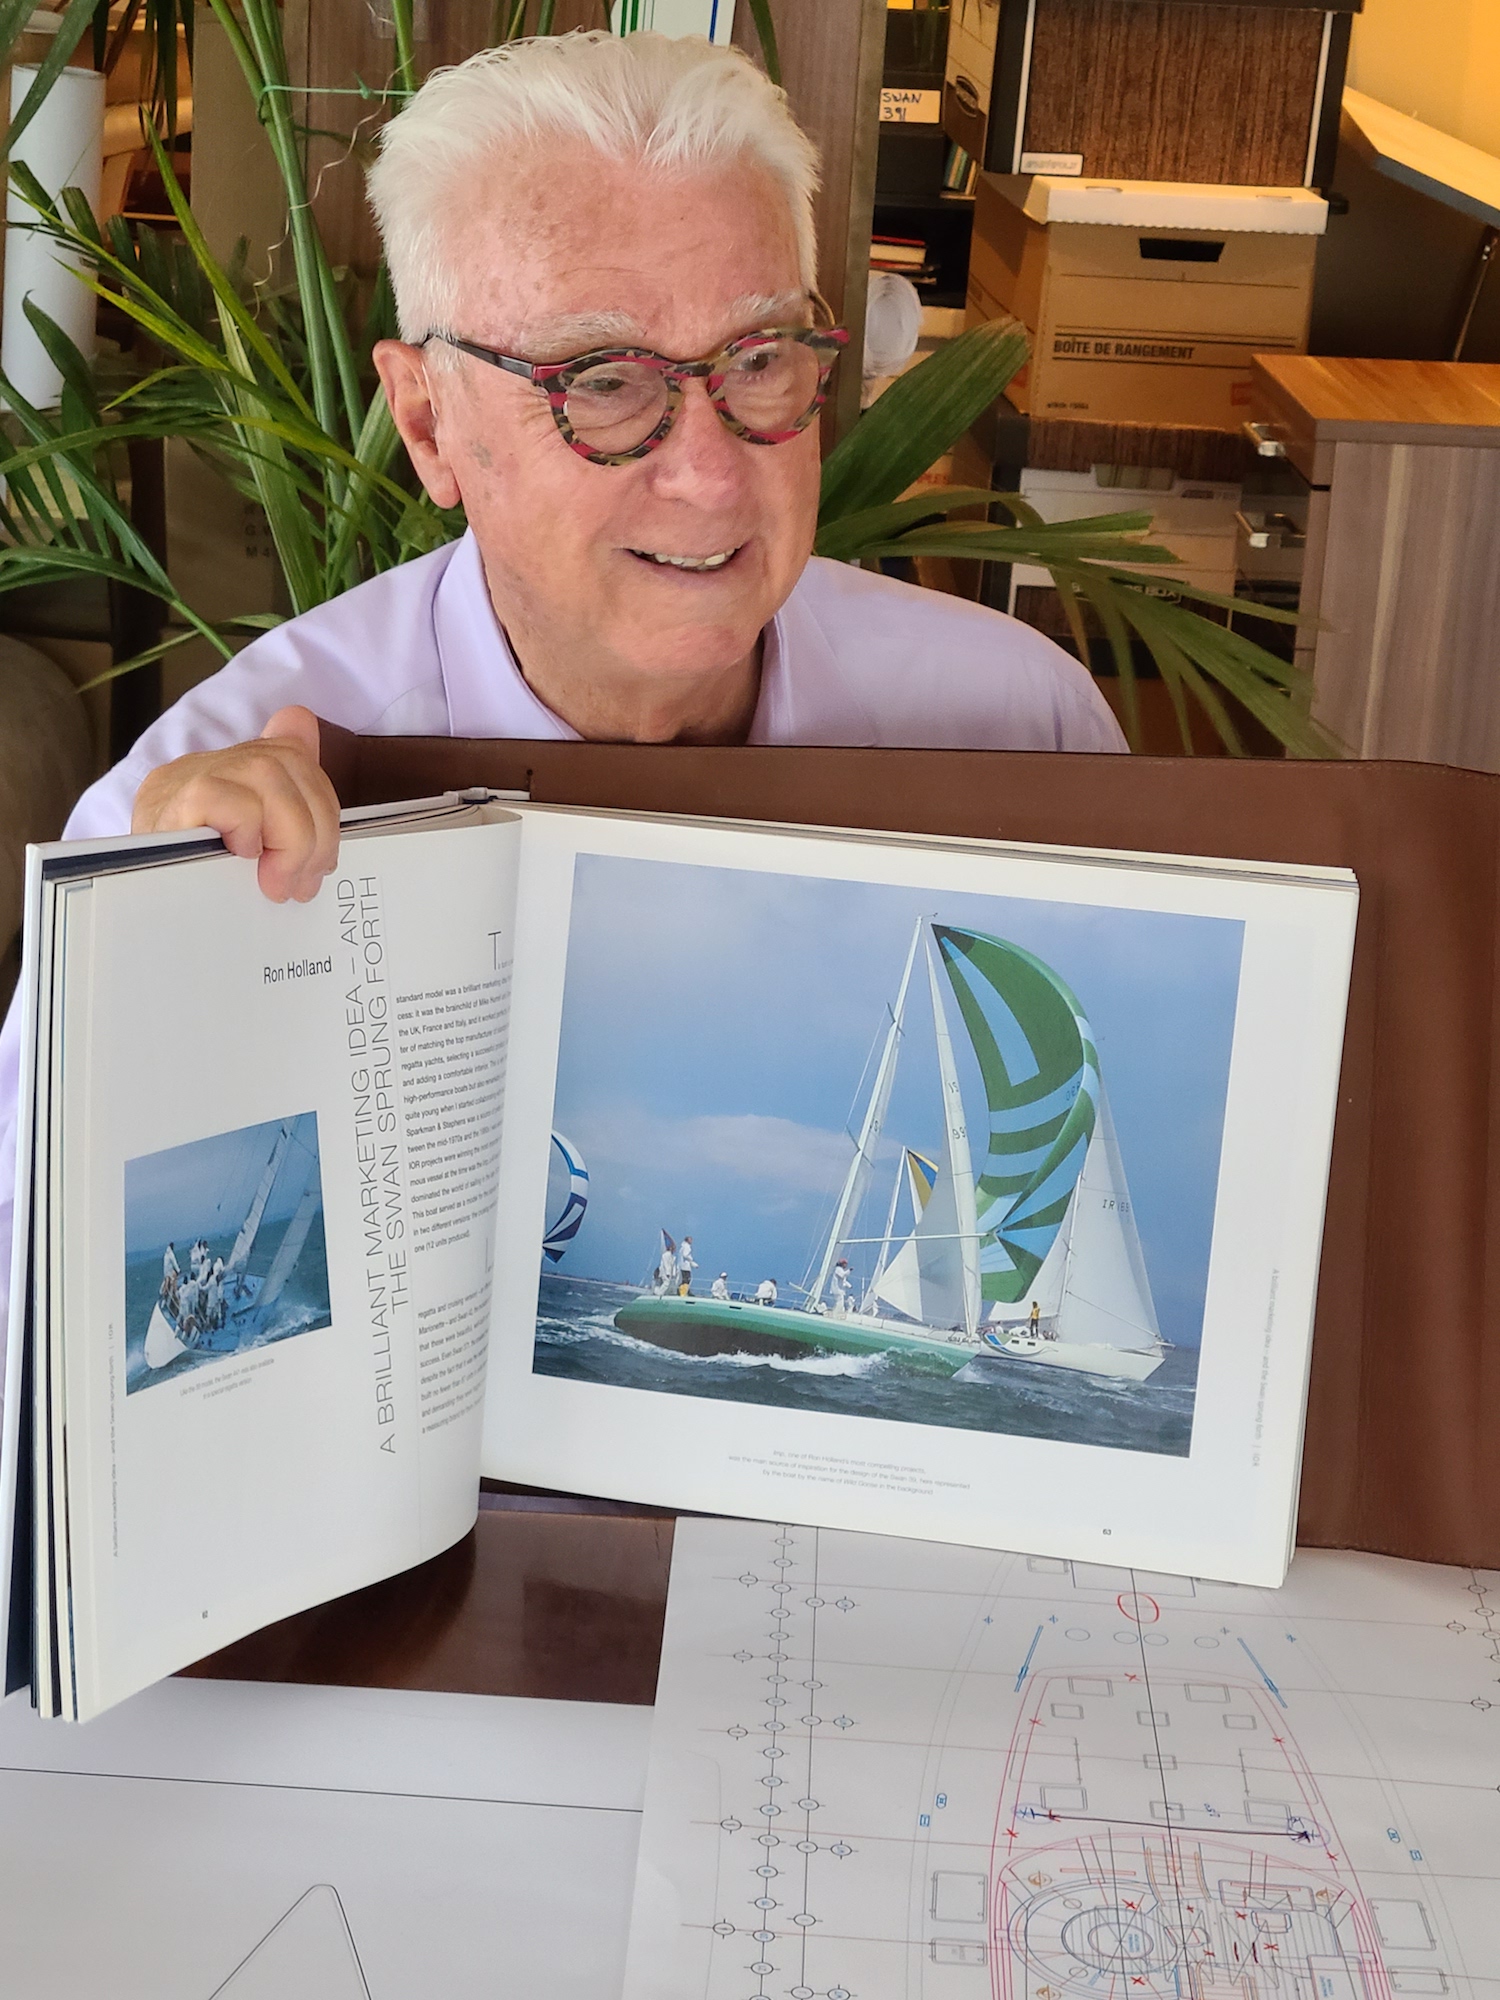 Ron Holland displays the Swan Book of Yachts with the legendary "imp" with green striped spinnaker showing in photo